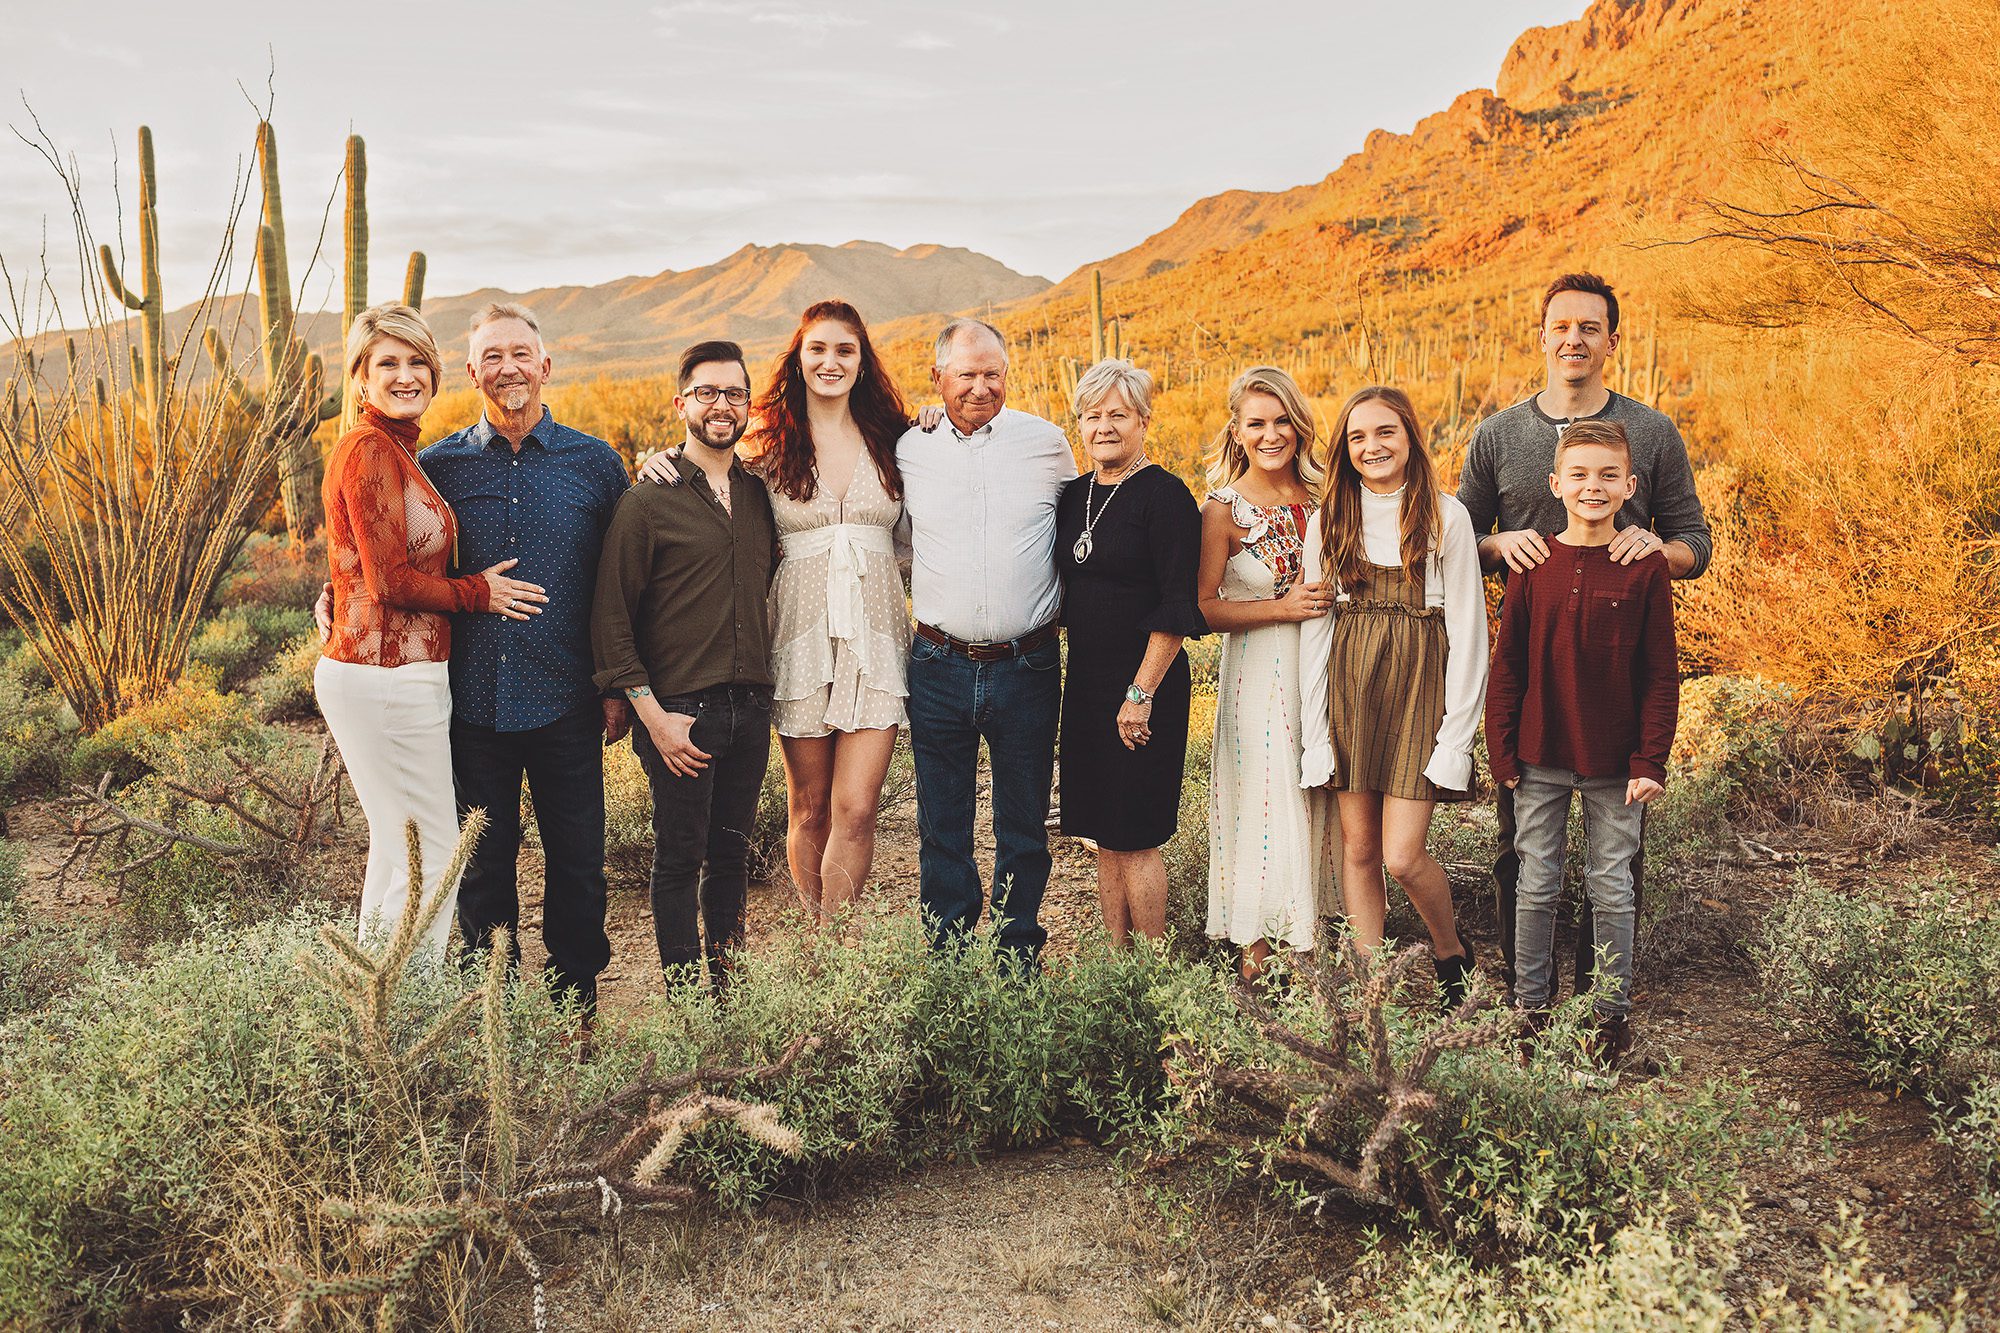 A family with three generations enjoys a beautiful desert sunset together during their family photo session